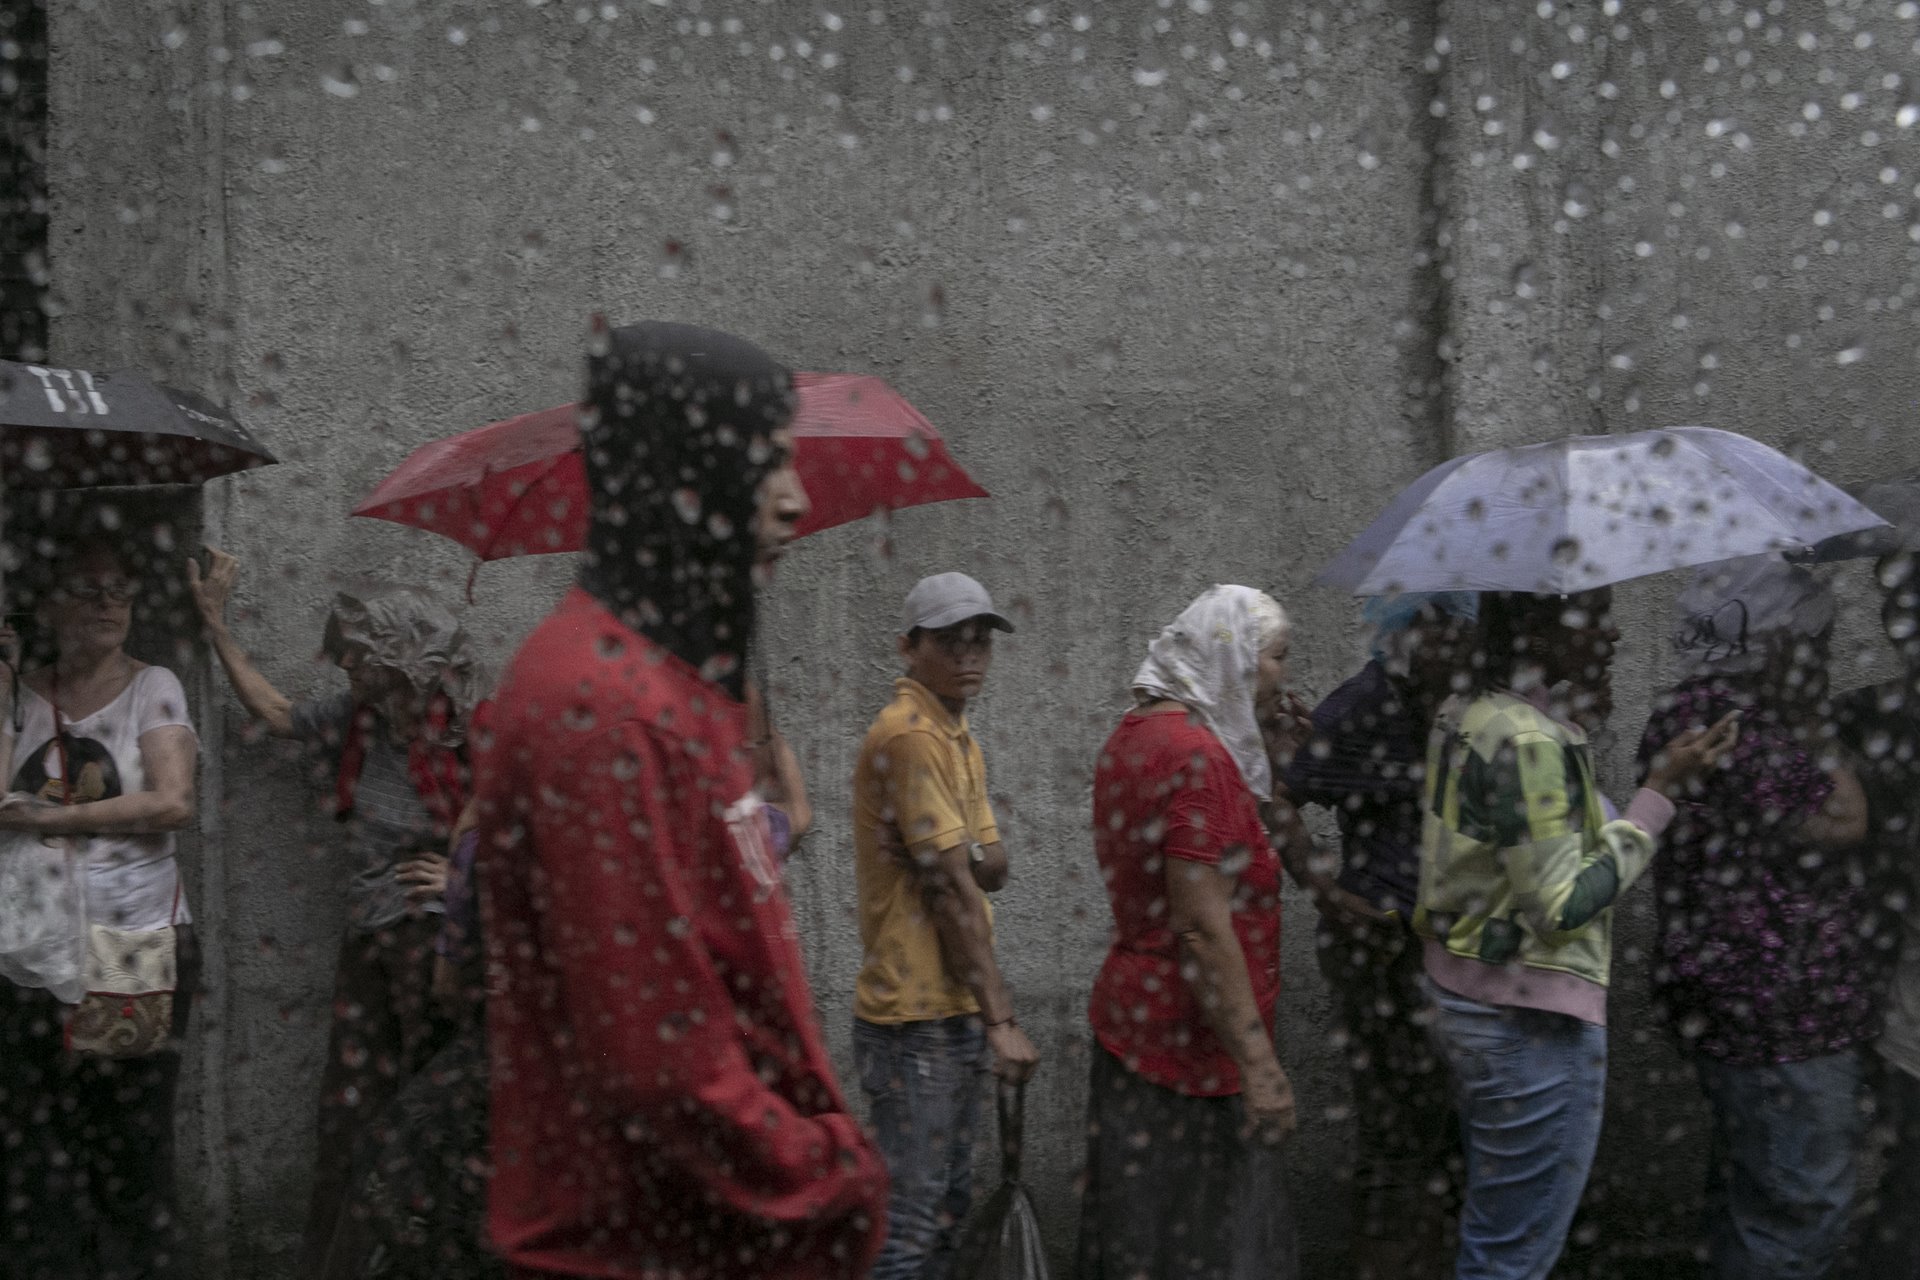 People wait in line to buy their allowance of &nbsp;two bags of rice per person, in Caracas, Venezuela. That morning, people had been lining up since 4am, and were standing in the rain until 11am. Venezuela was experiencing chronic food shortages at the time. In 2016, over 75 percent of Venezuelans said they had lost weight (around eight kilograms on average) due to lack of access to food.